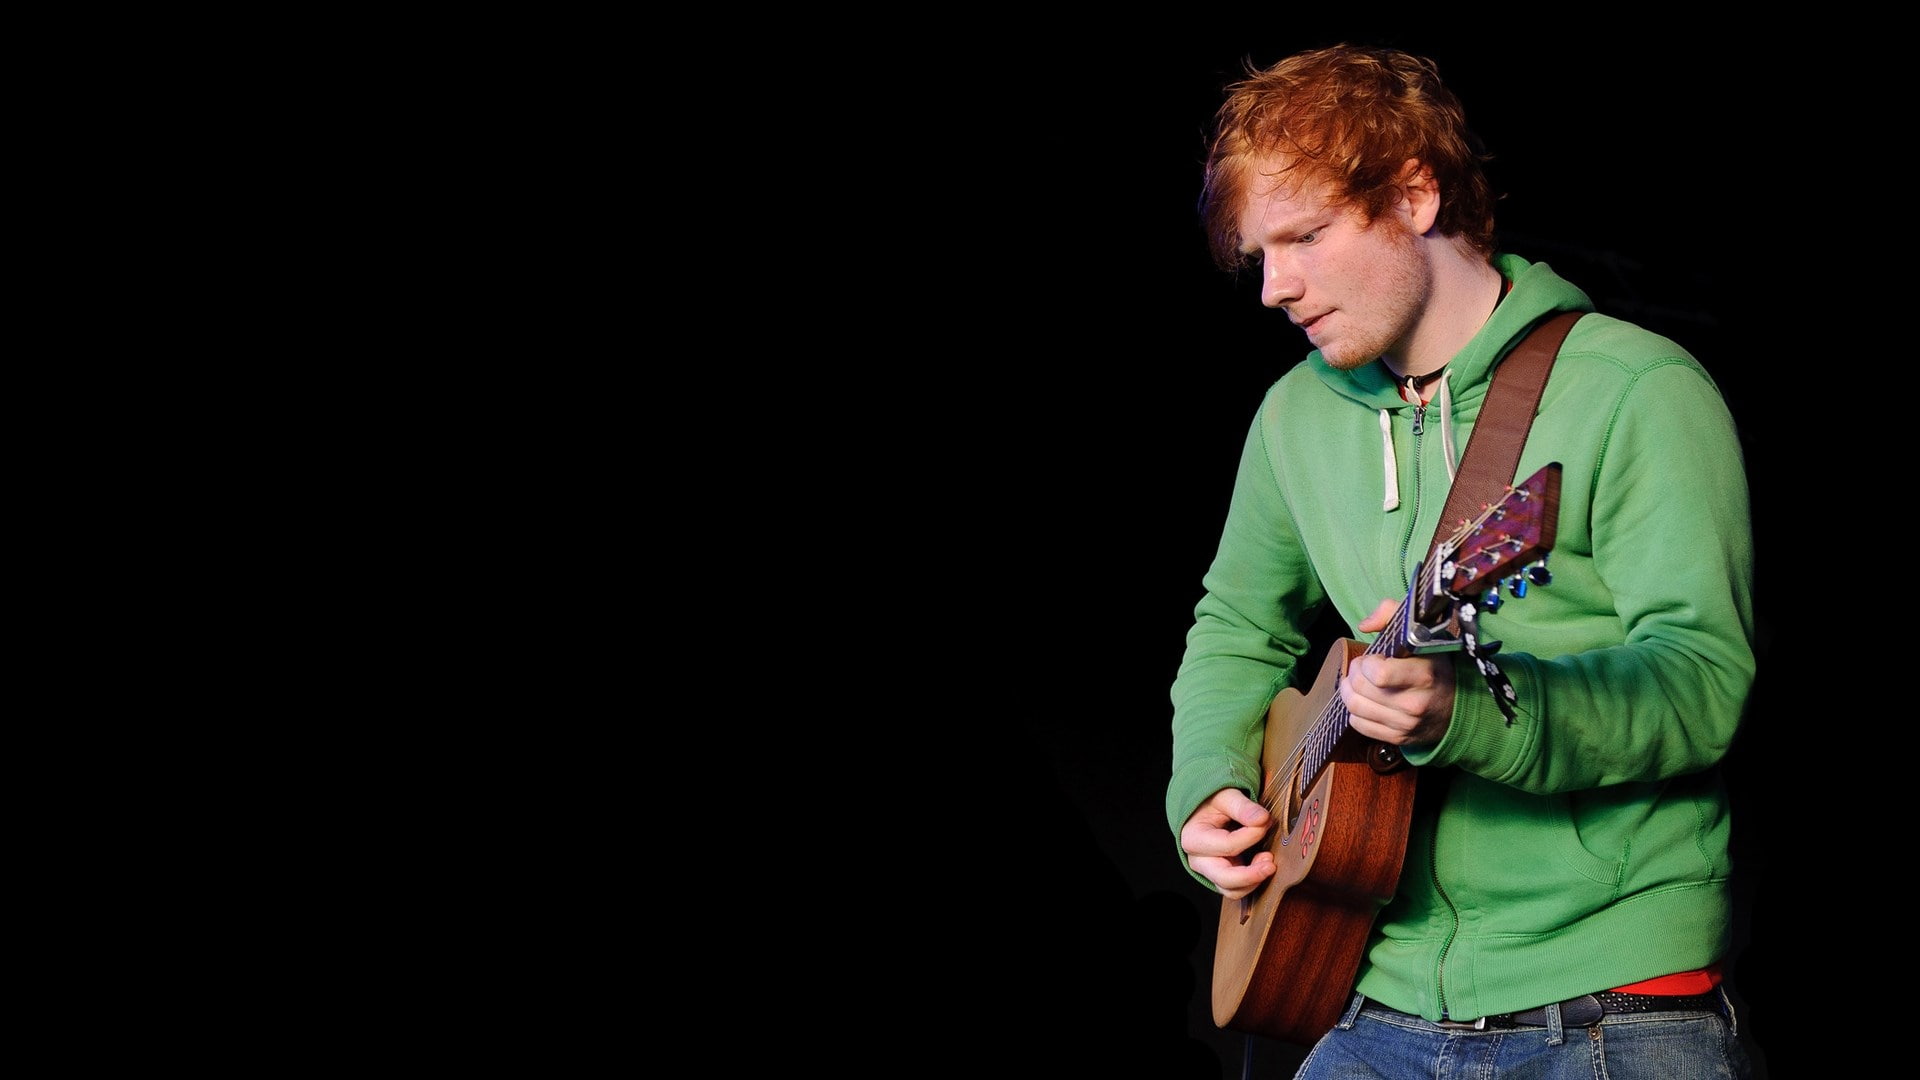 ed sheeran, music, musical instrument, copy space, one person